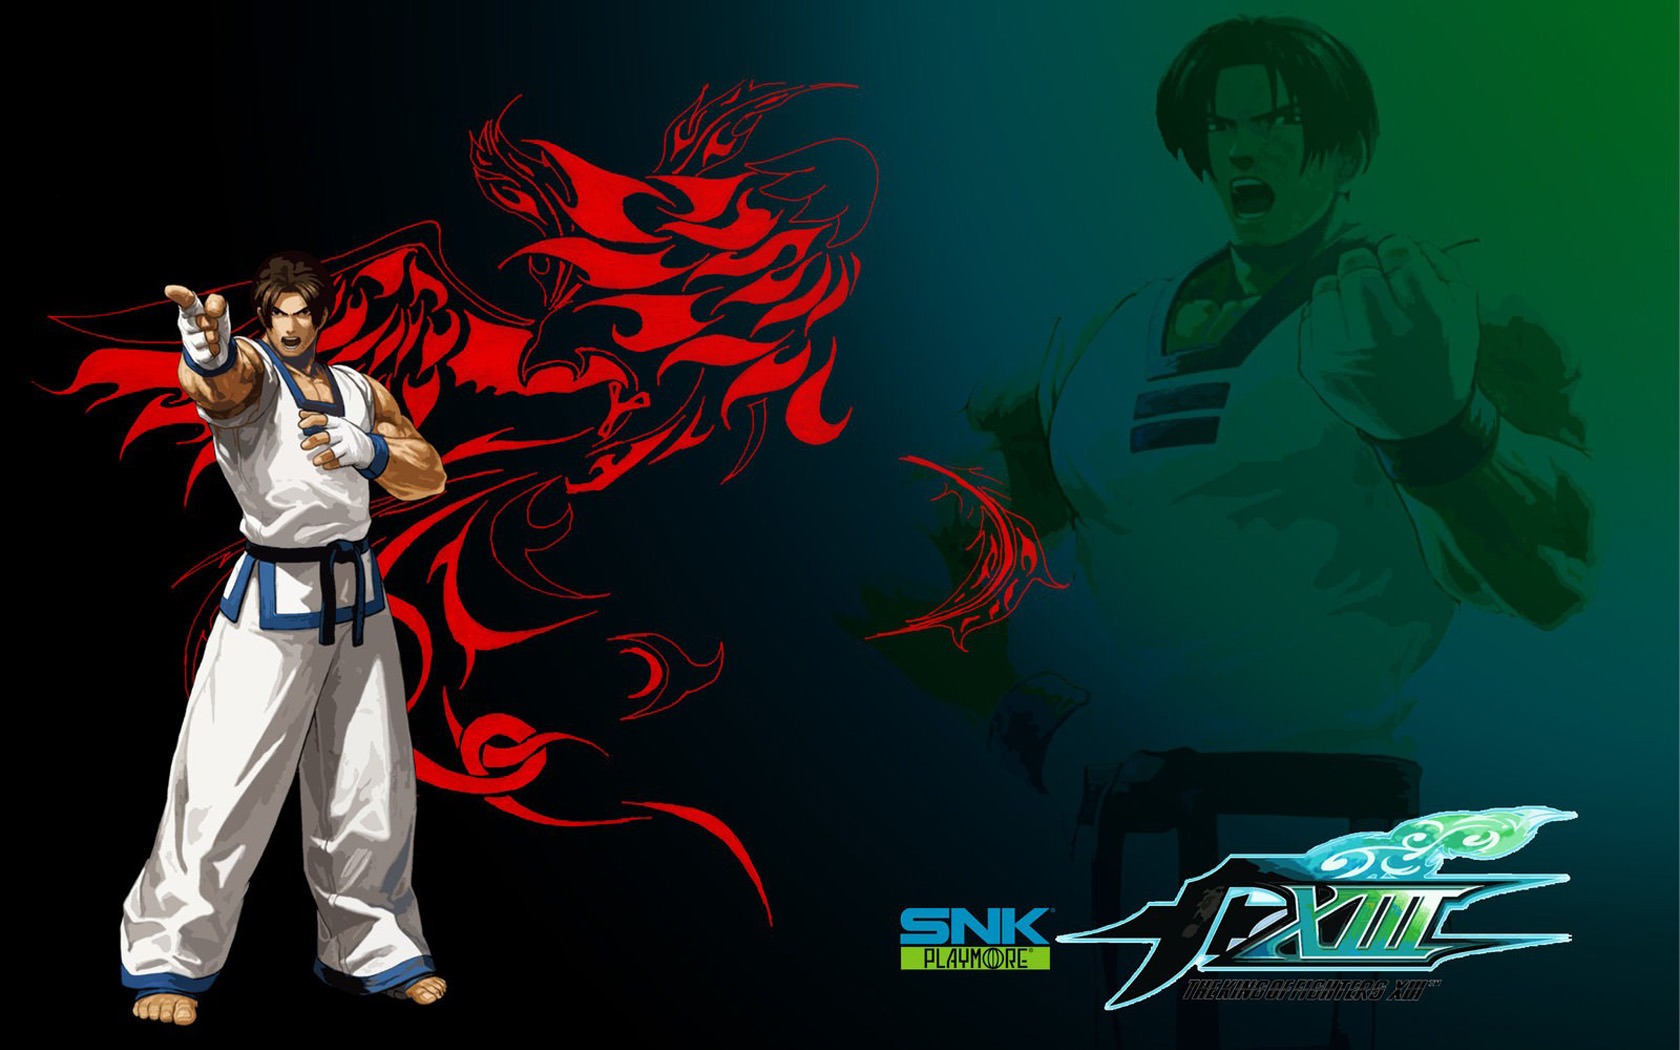 Le roi de wallpapers Fighters XIII #14 - 1680x1050